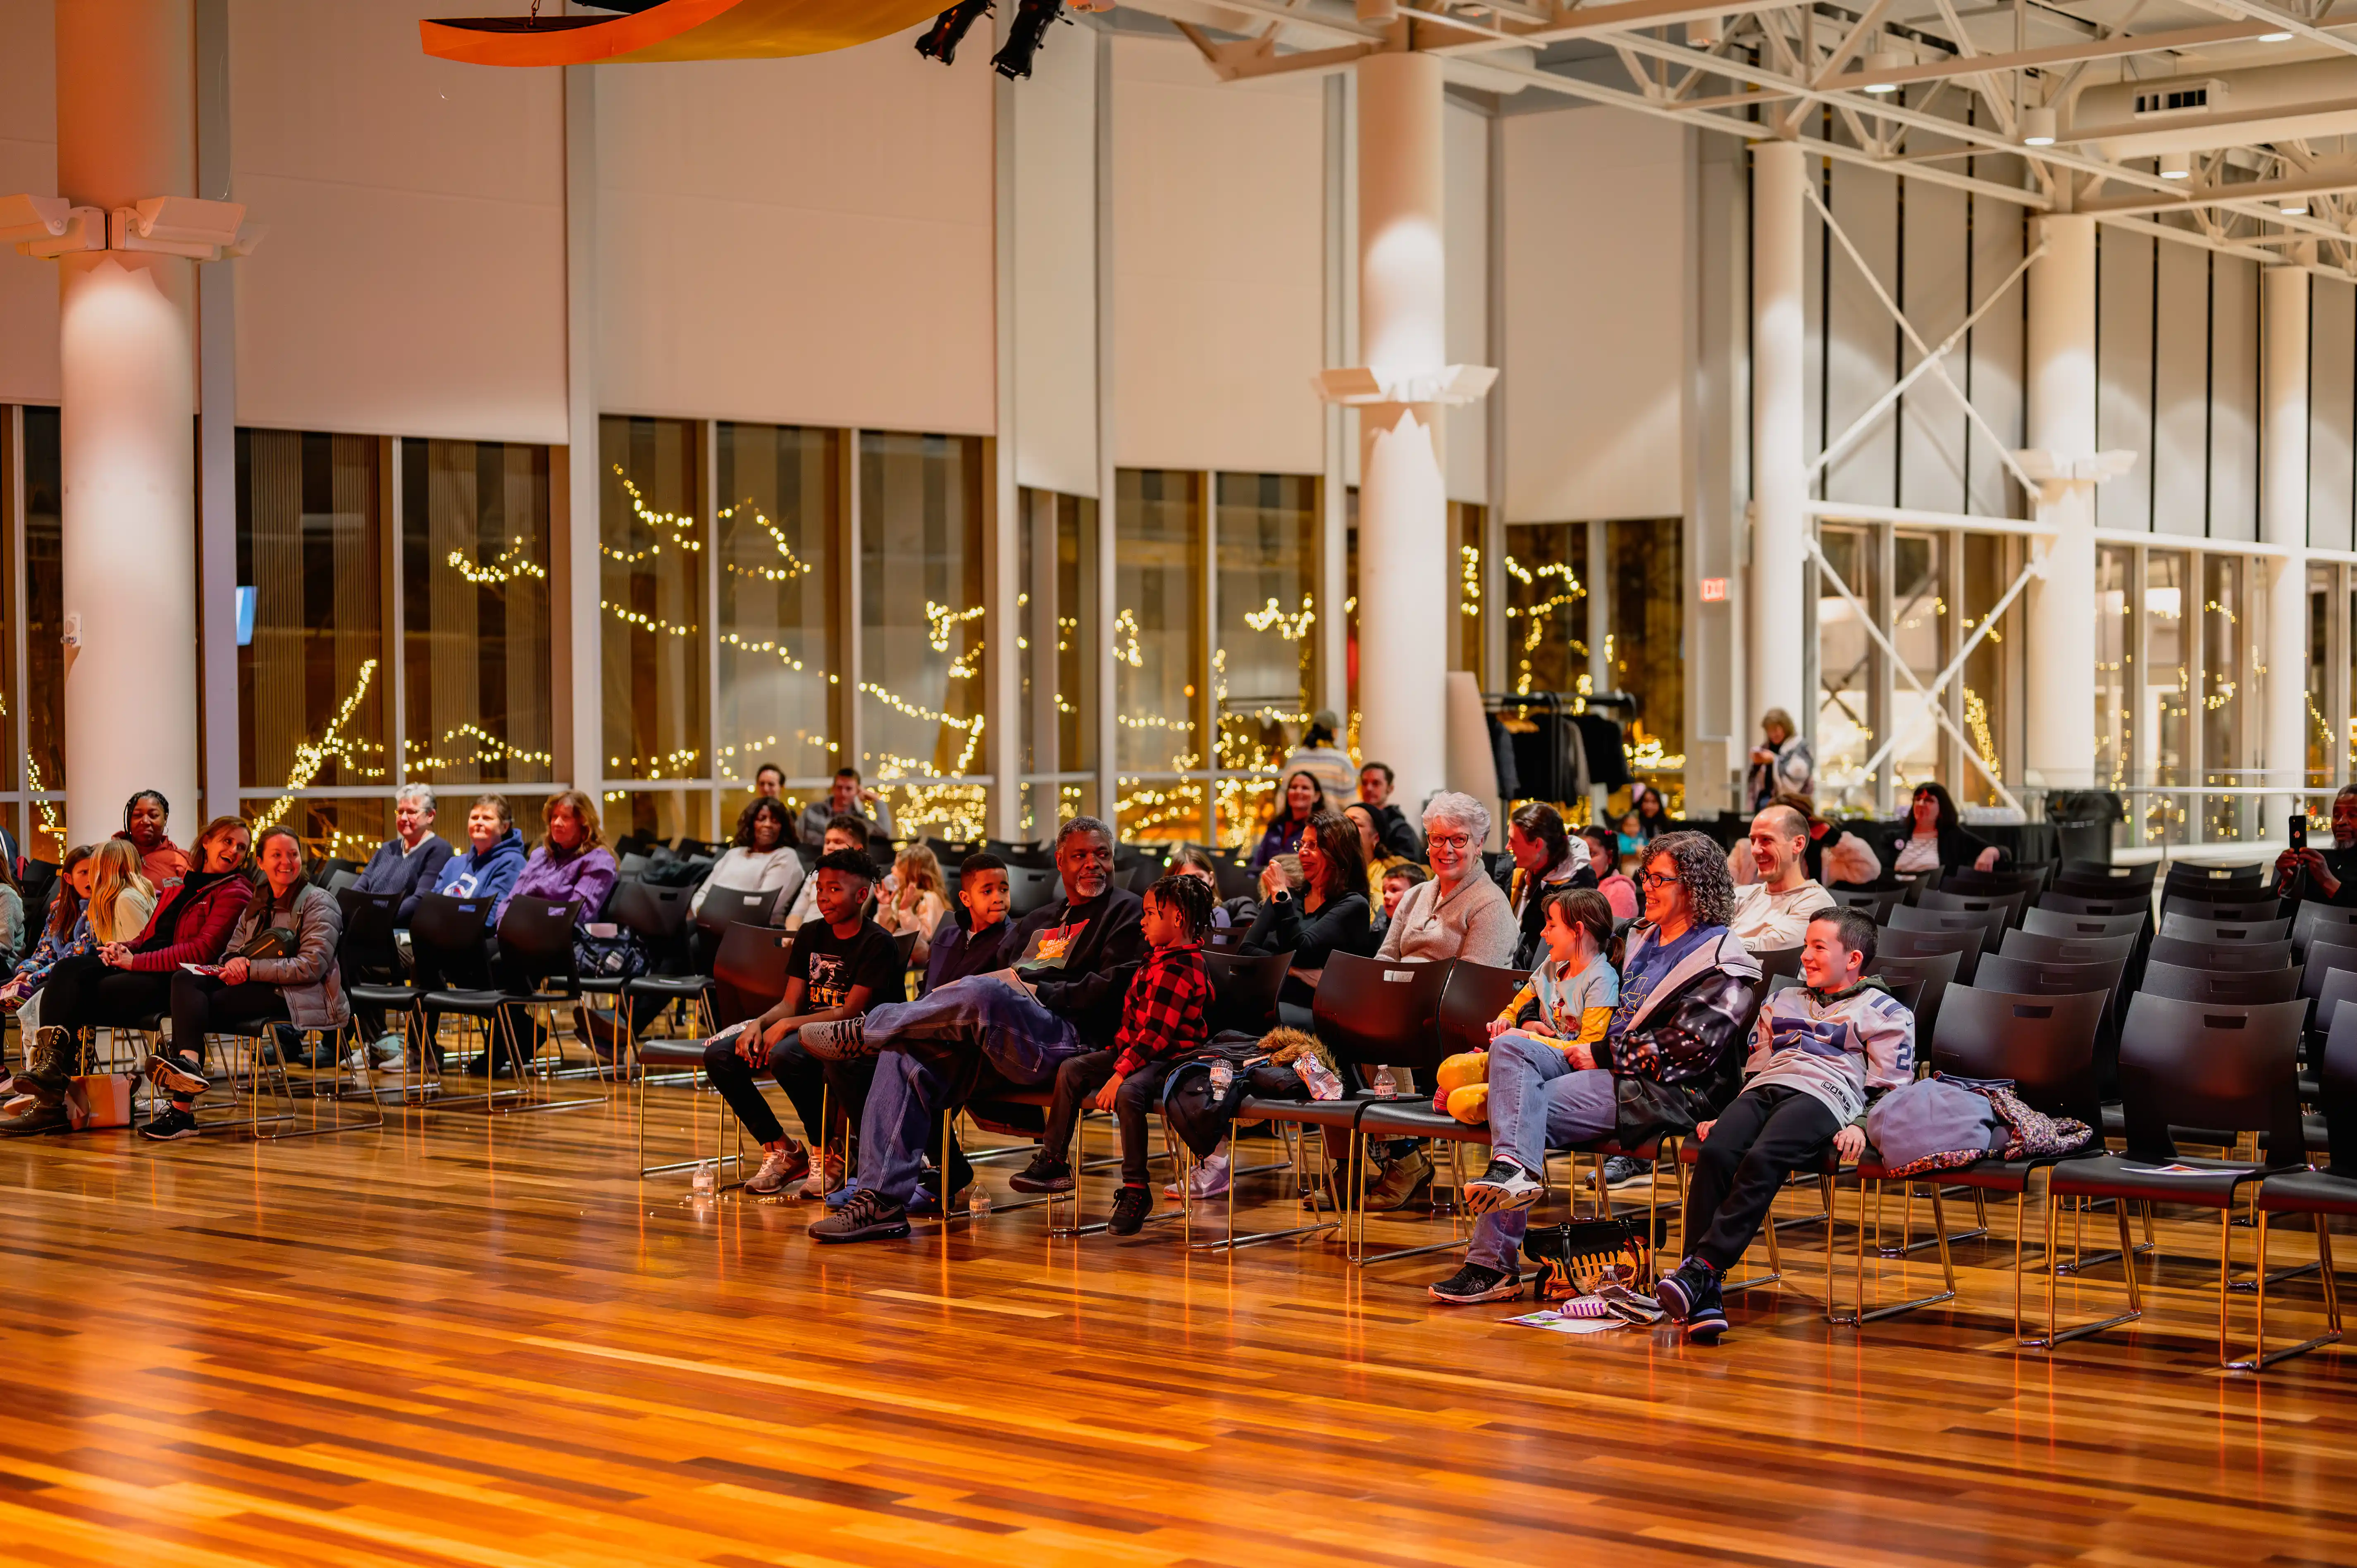 Audience seated on chairs watching a performance in a warmly lit indoor space with decorative lights.